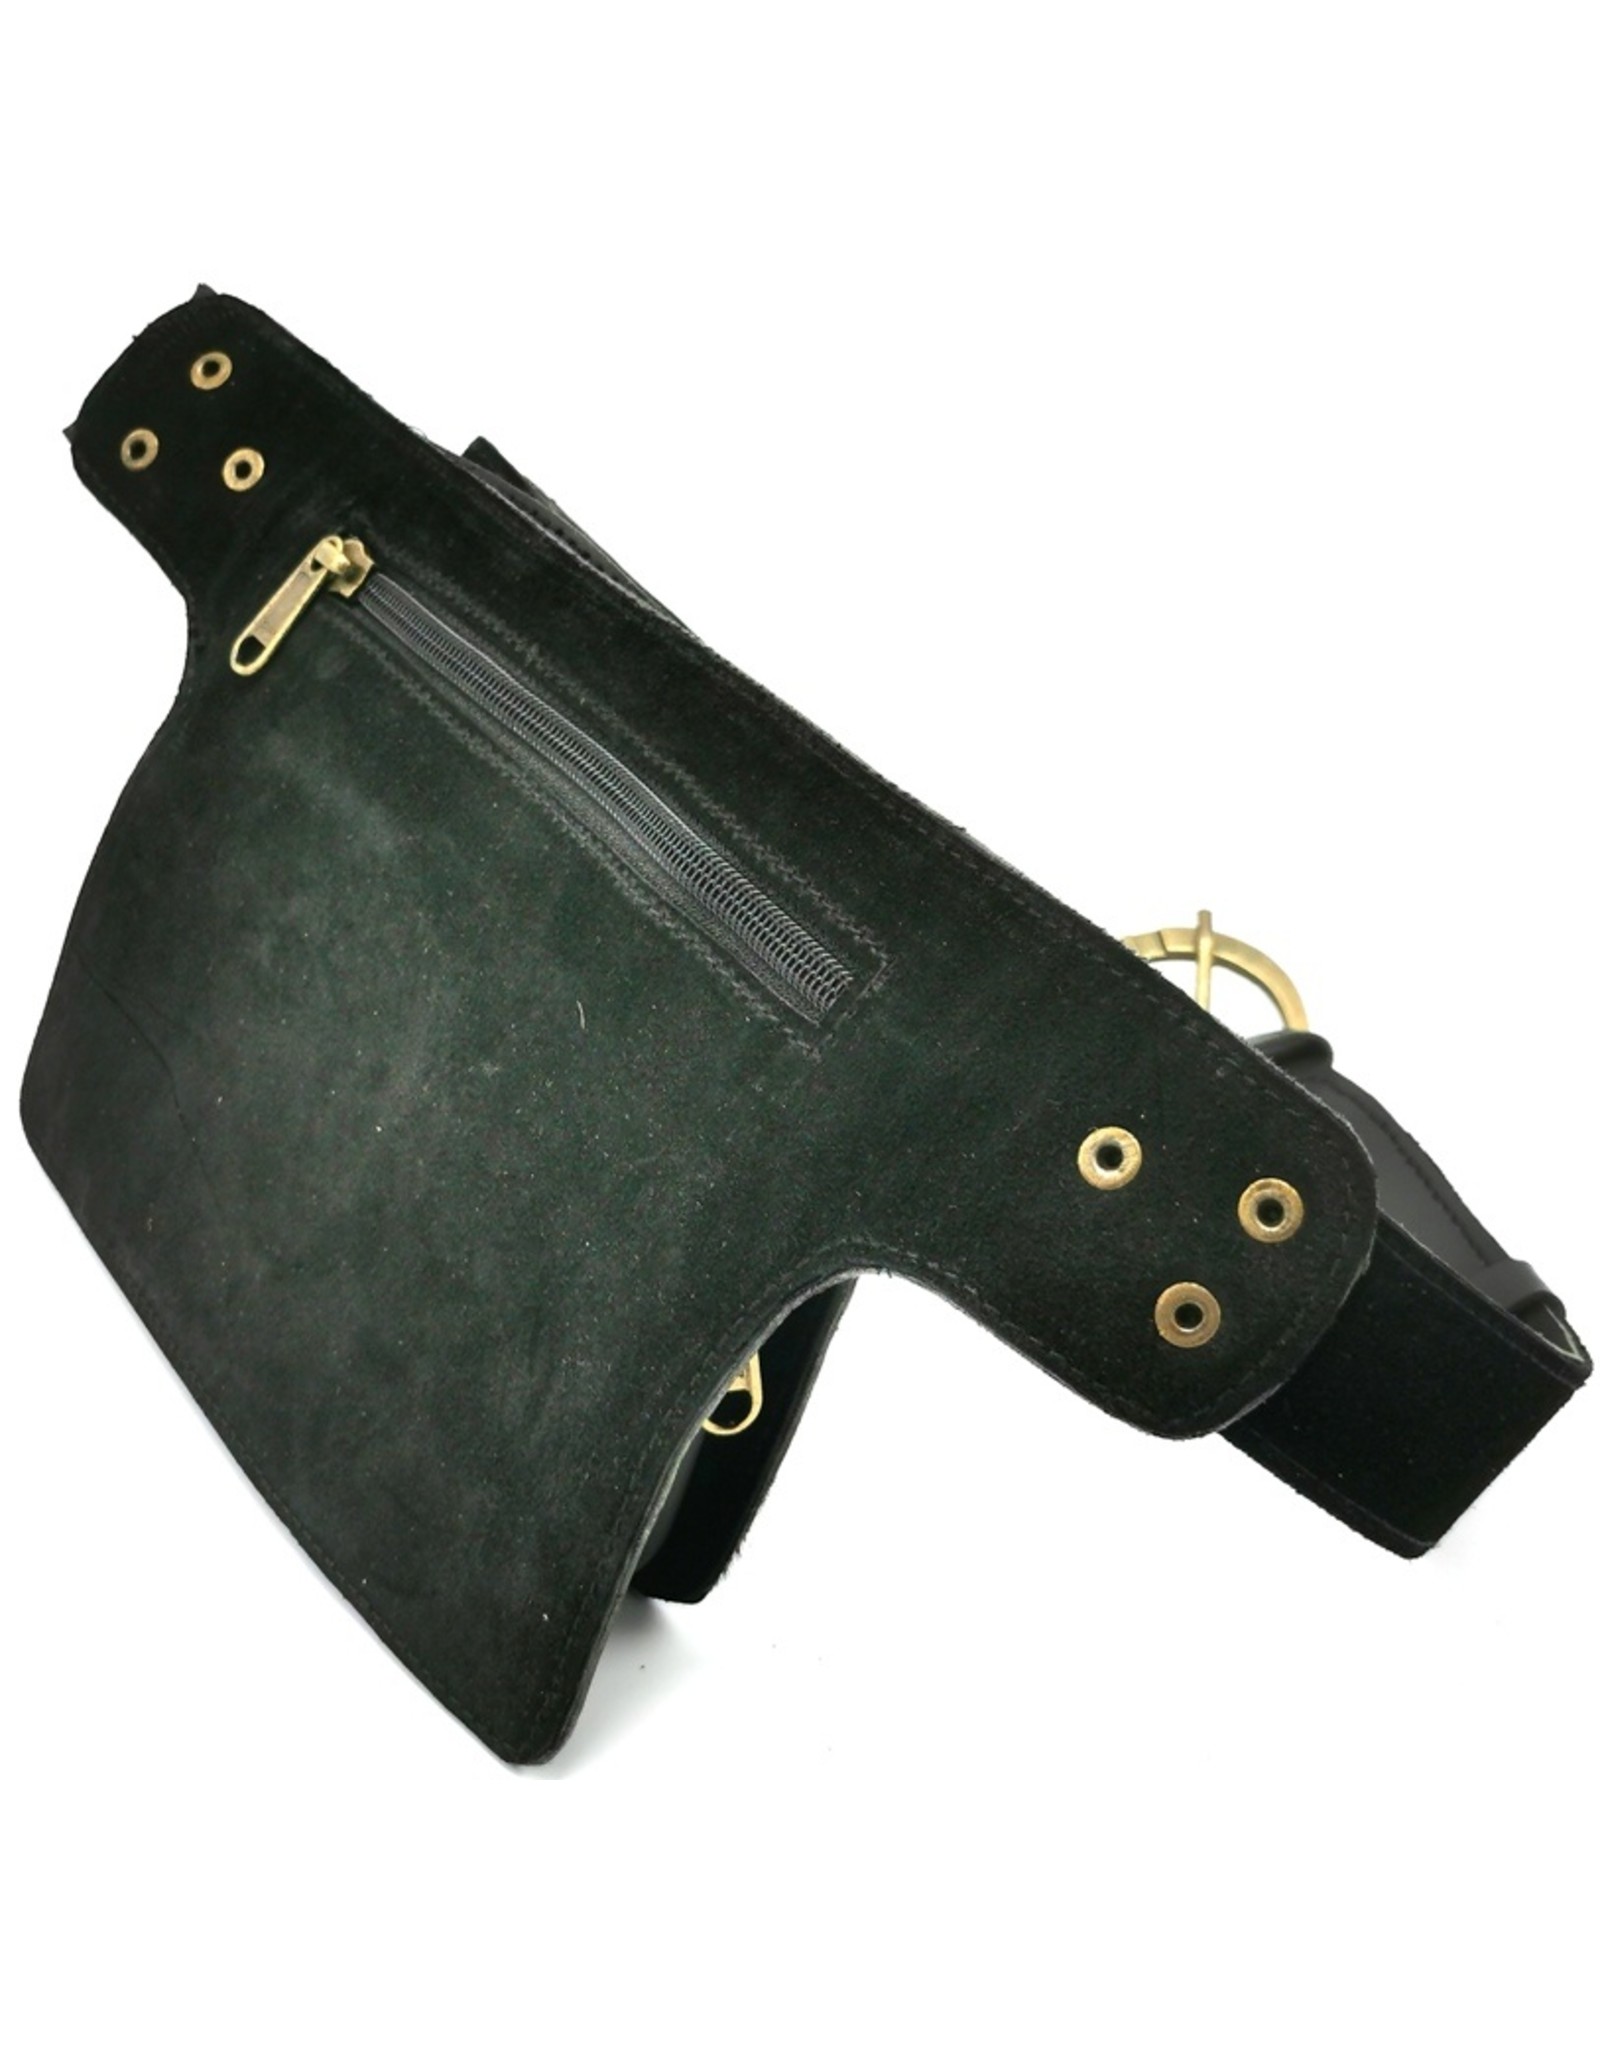 ONK Small leather bags, cluches and more - Cowskin Ibiza style waist bag black